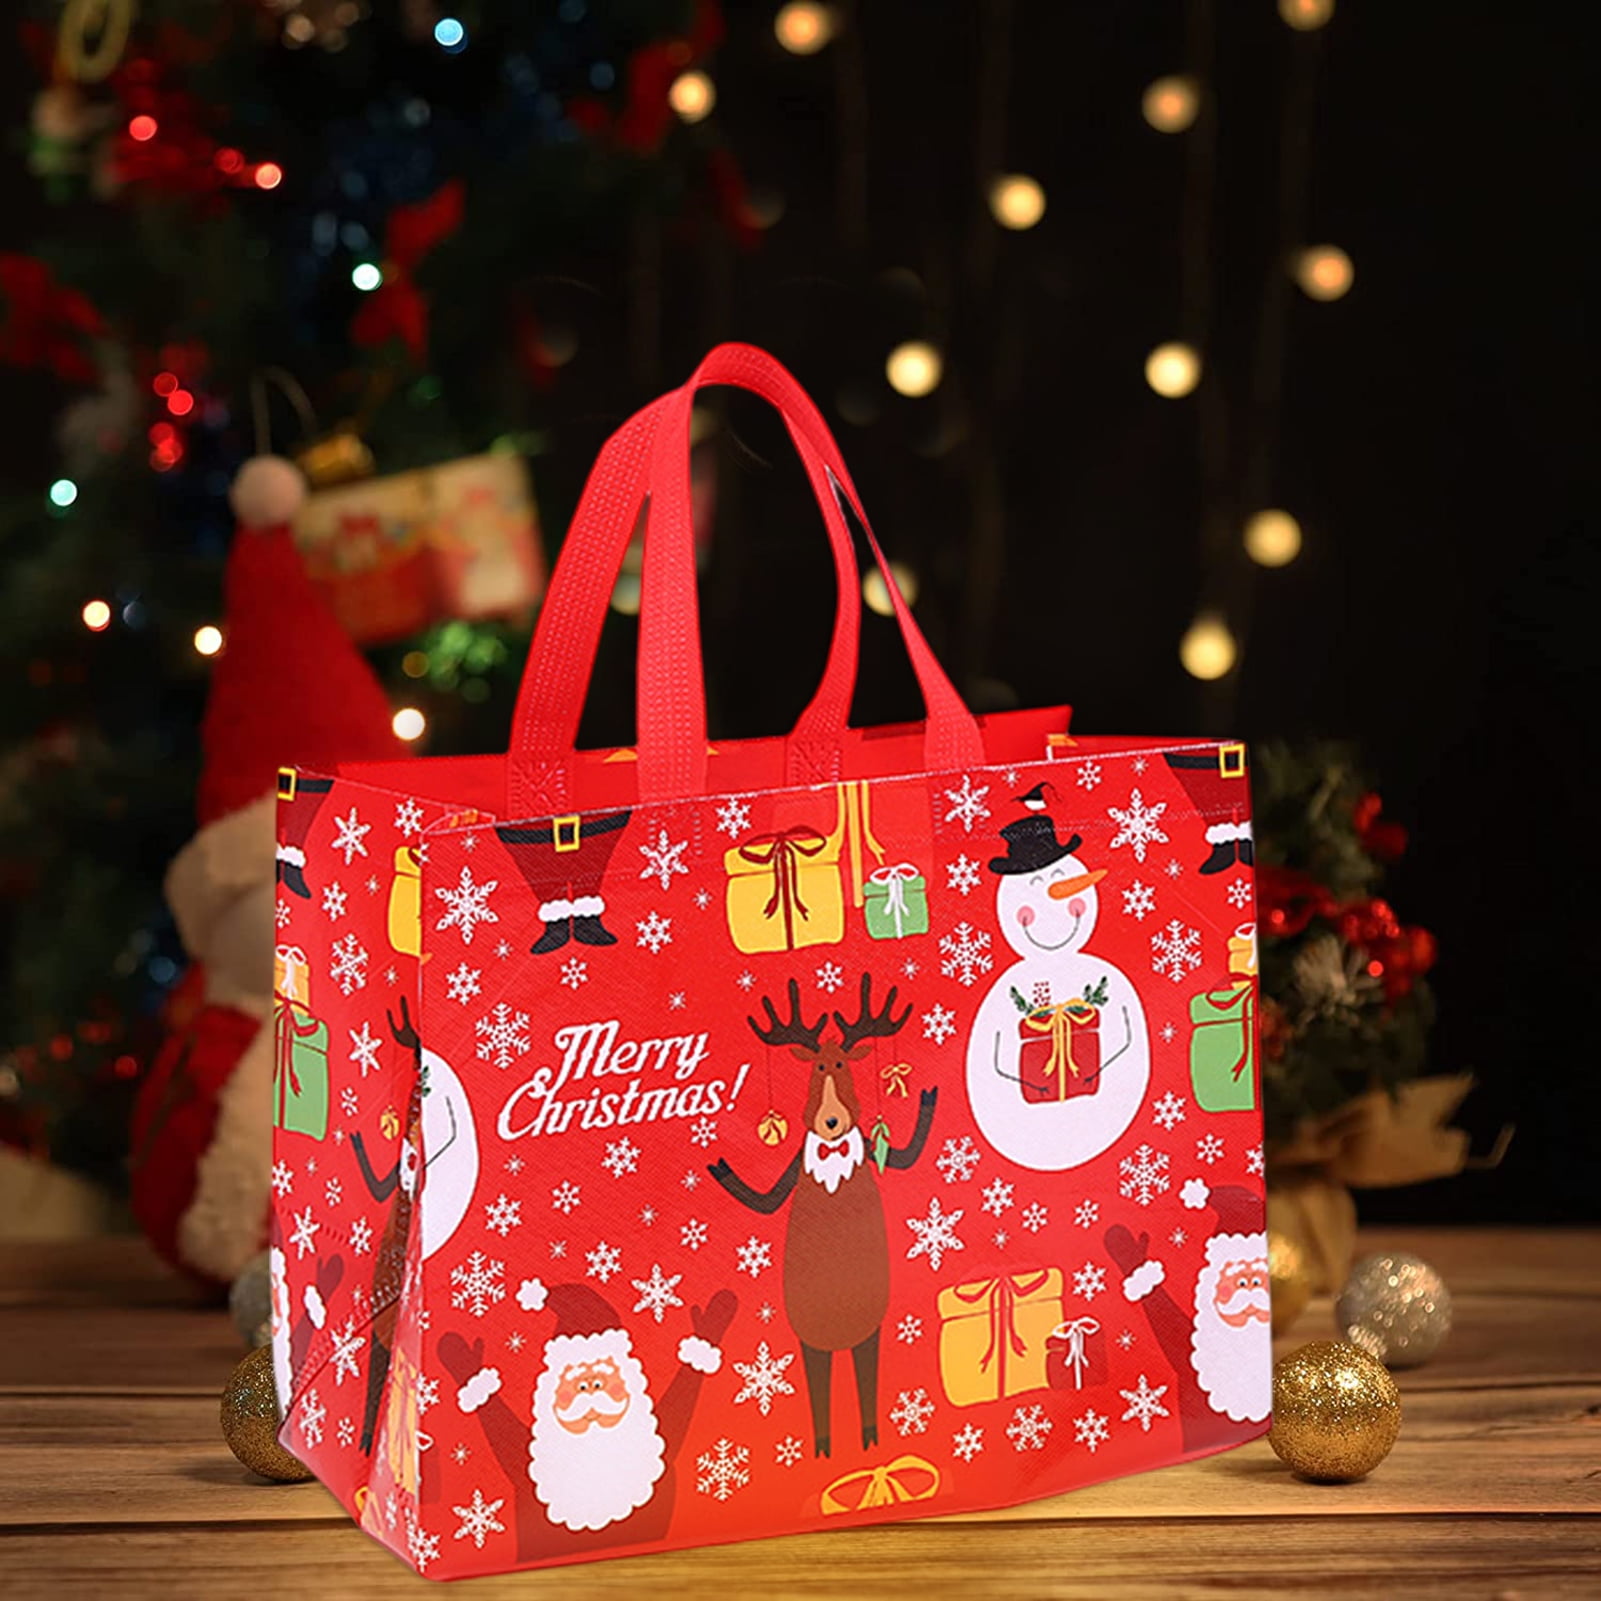 Buy Christmas Gift Bag Online In India  Etsy India